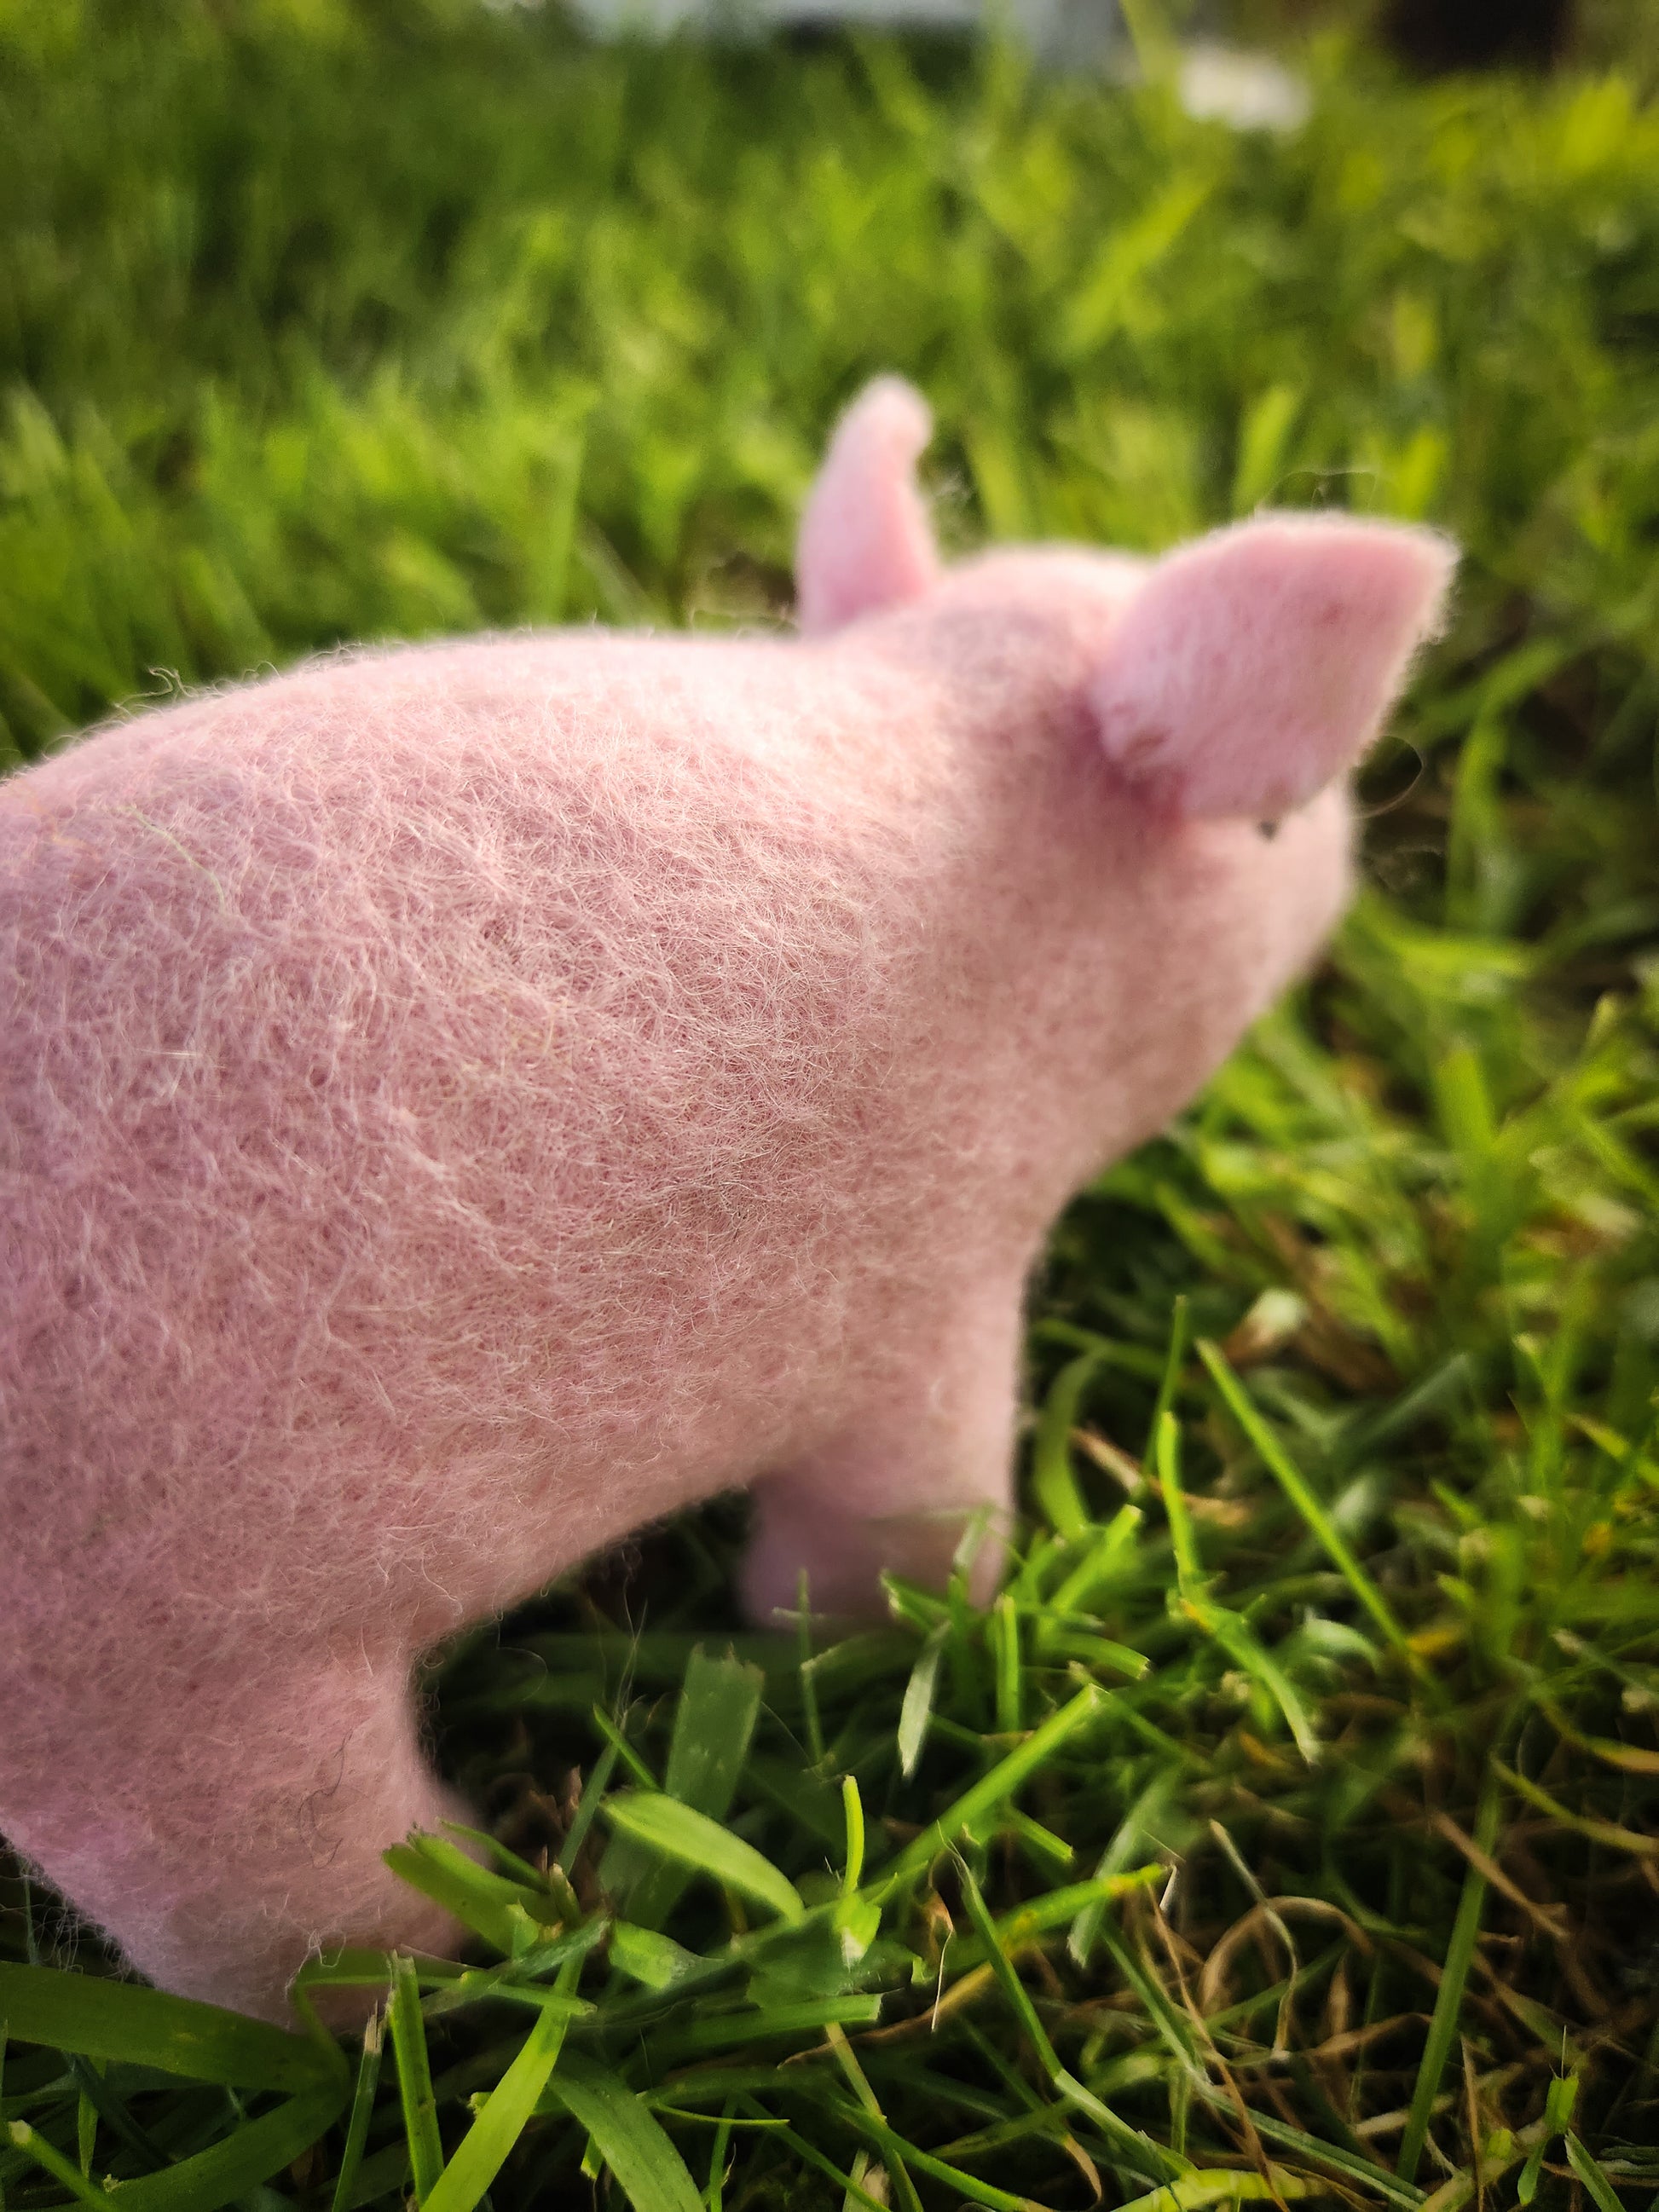 Pippa the Pig - Felt Toy Pig in grass